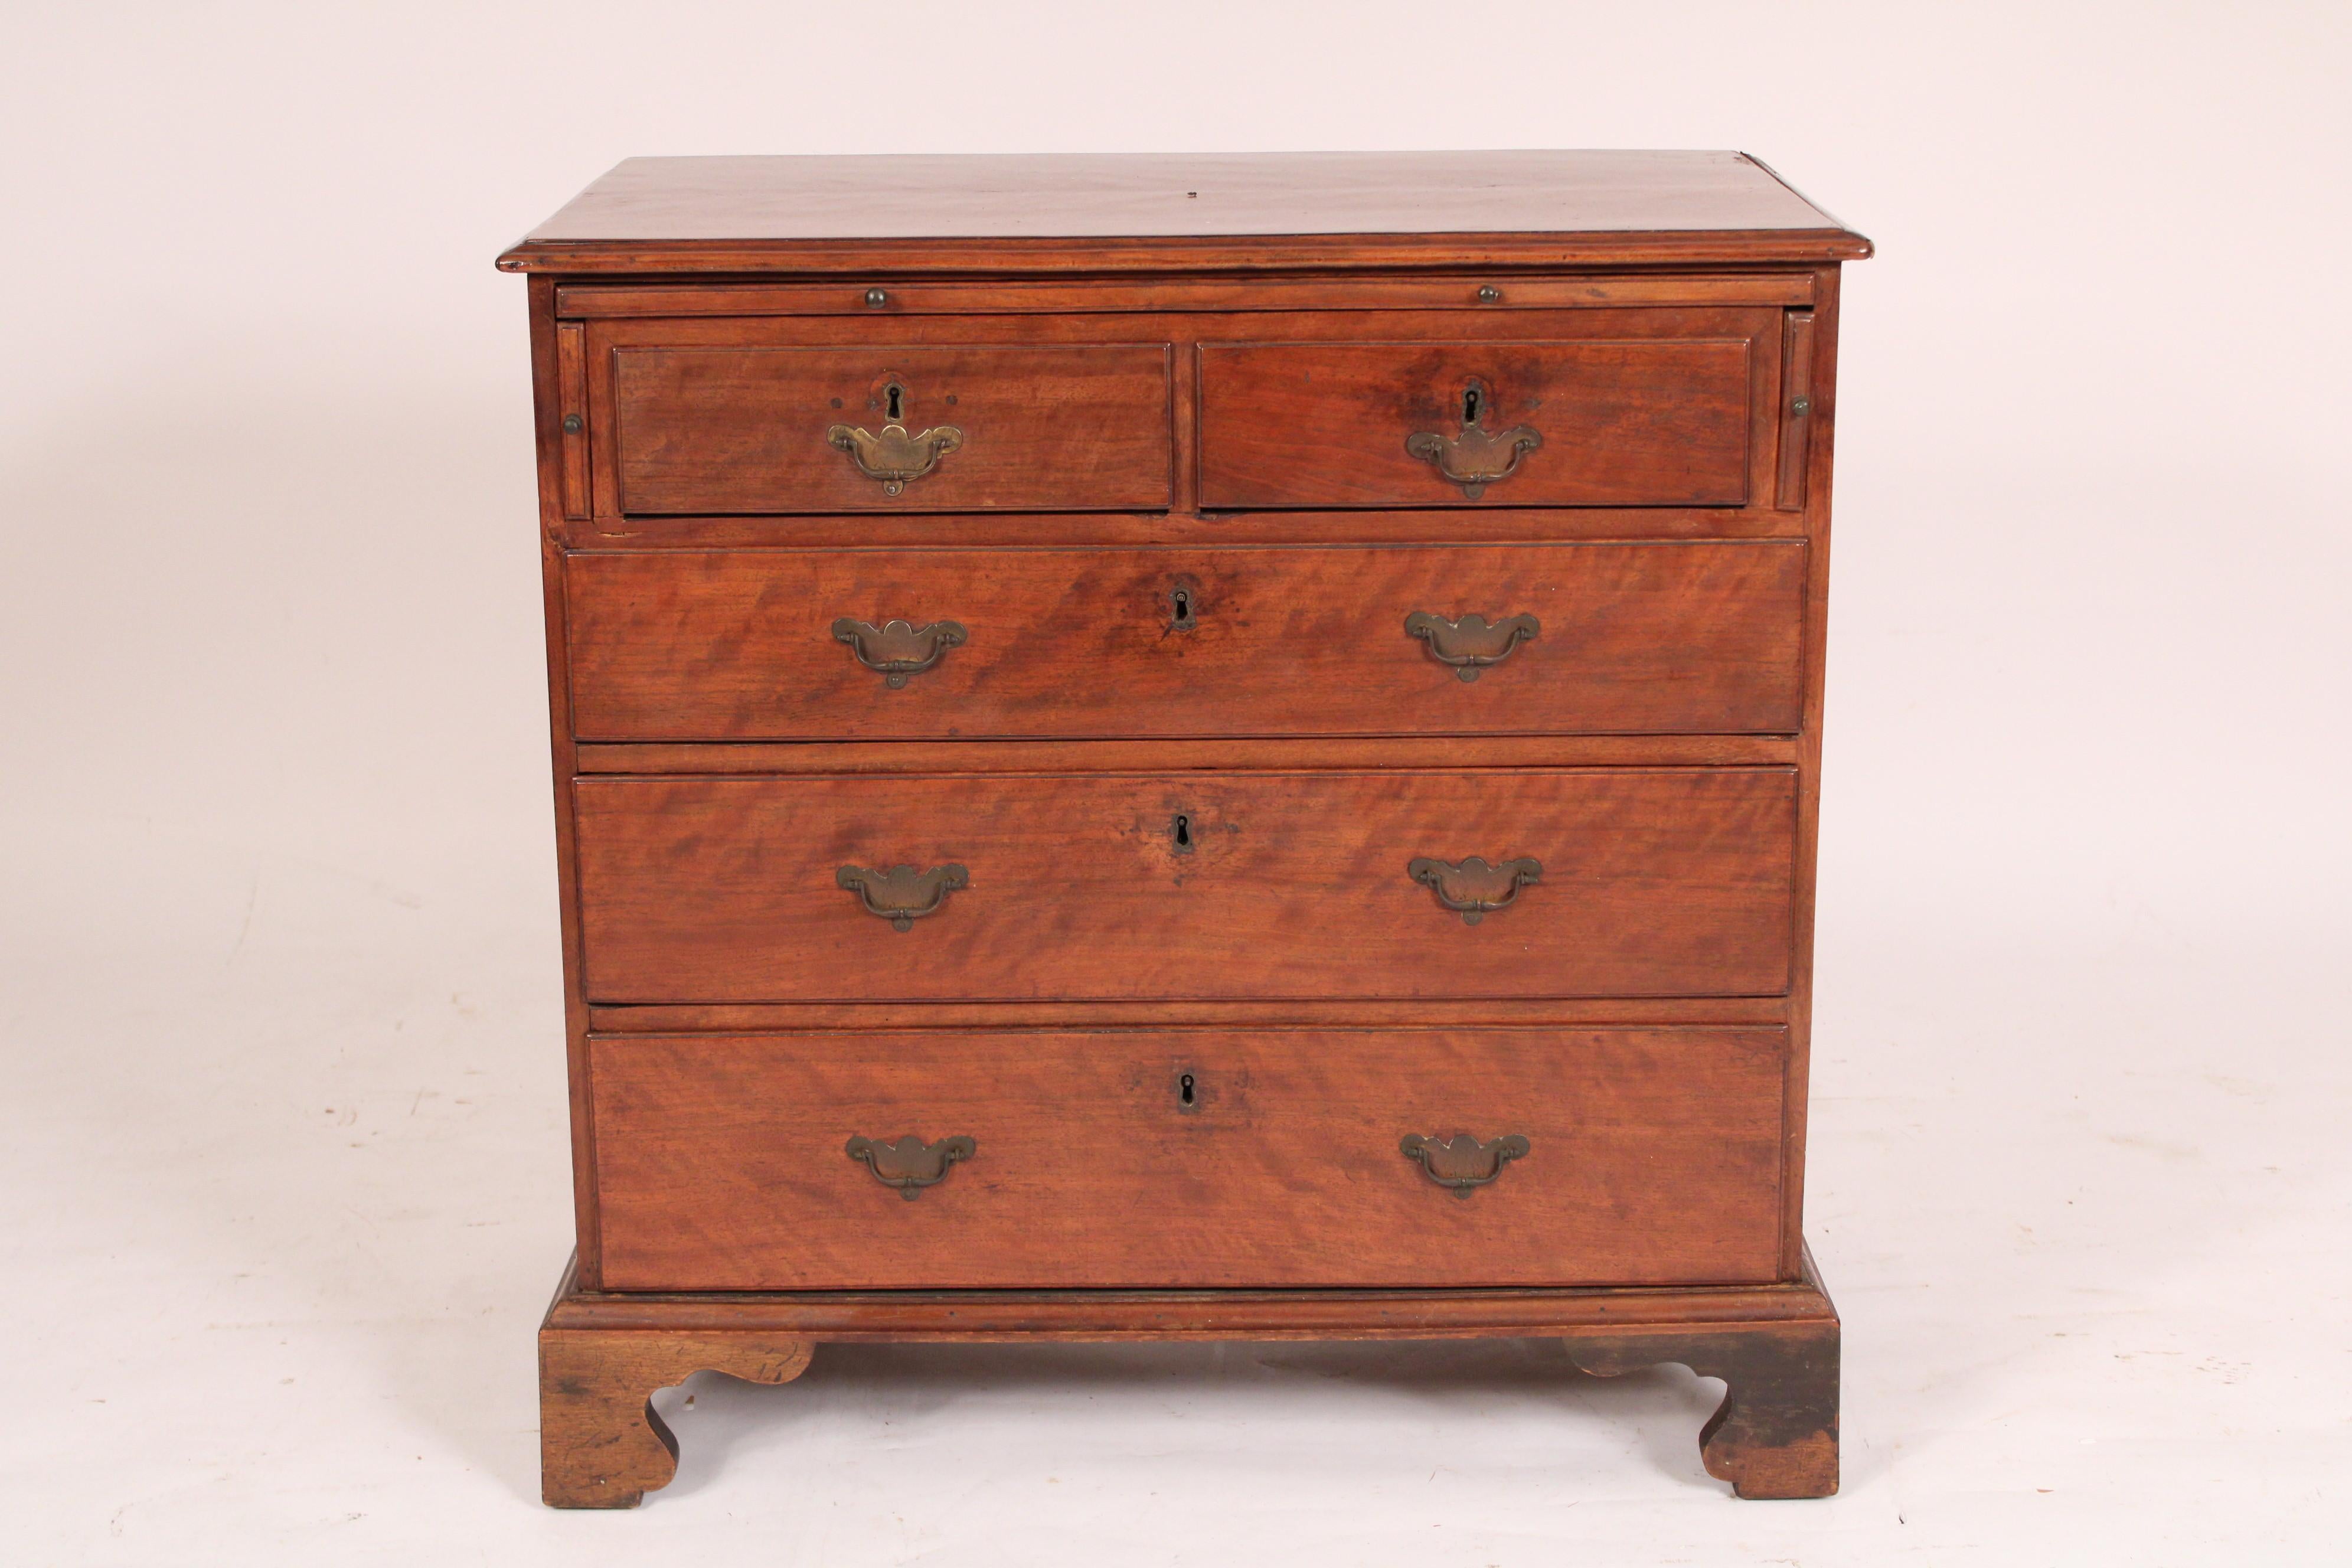 George III mahogany bachelors chest, late 18th century, With a plum pudding mahogany two board top with thumb molded front and side edges, a pull out brushing slide with two pull out supports on either side, two plum pudding mahogany top drawers and